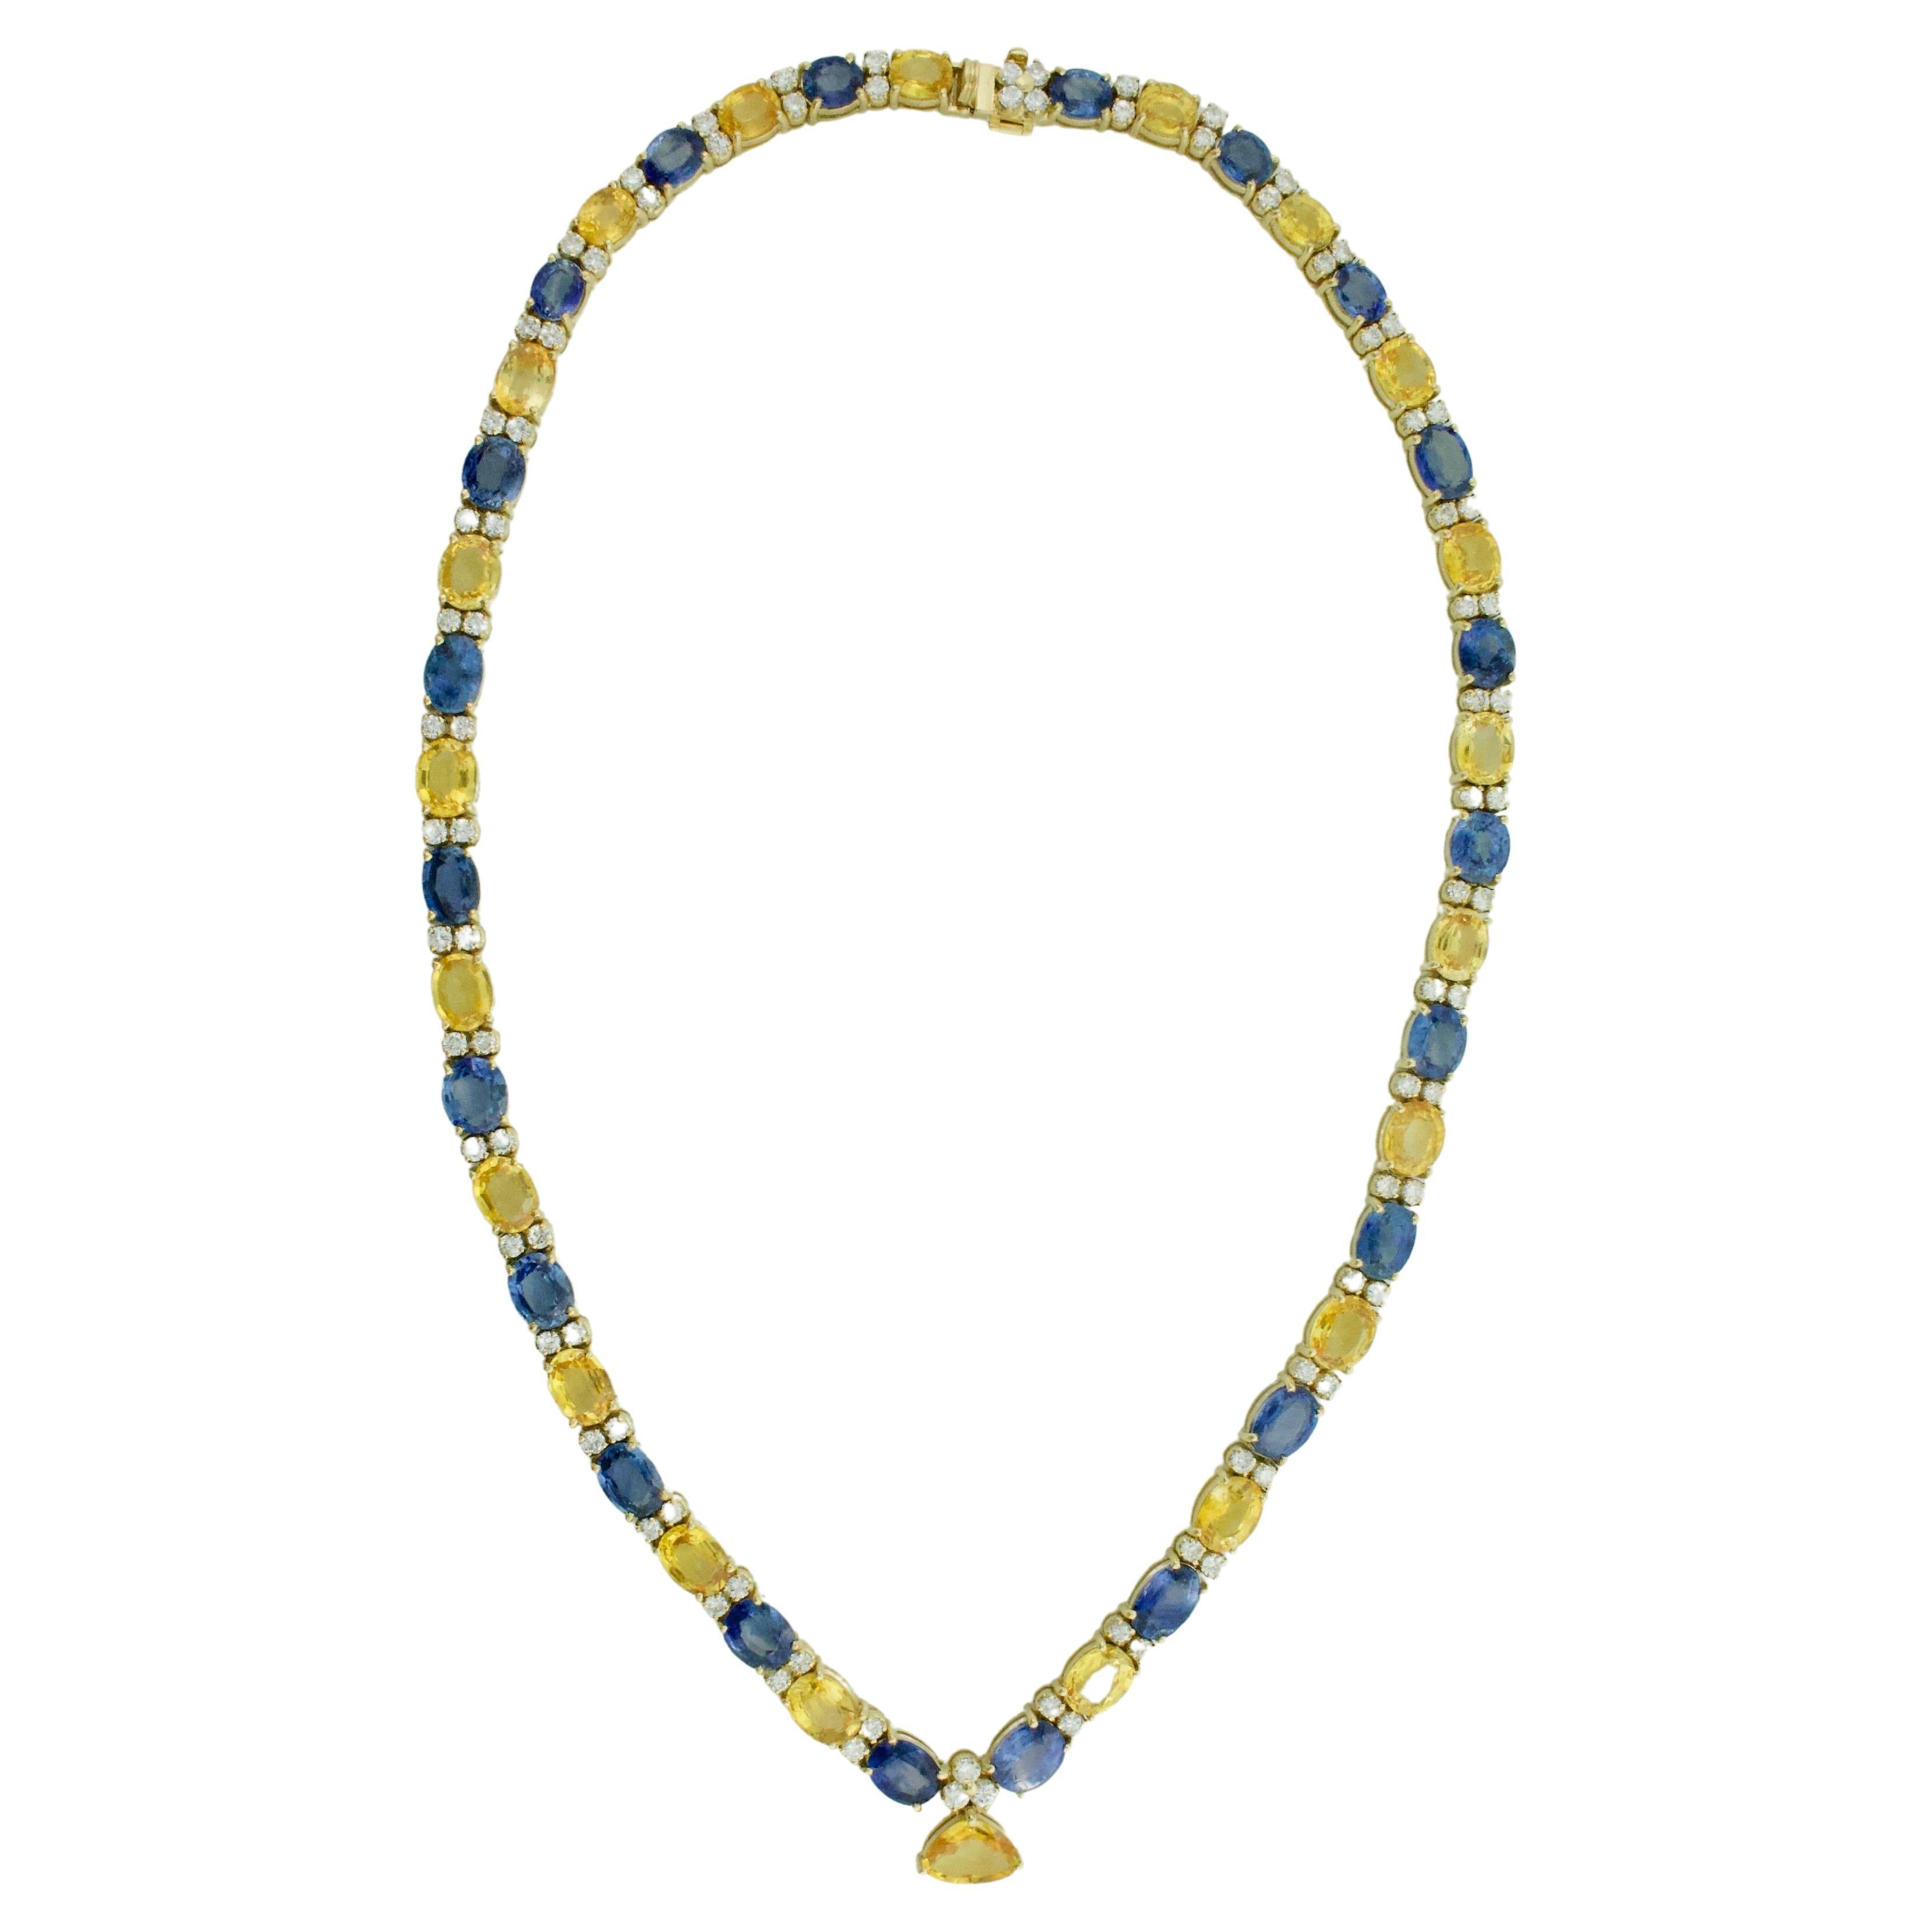 Multi Colored Sapphire and Diamond Necklace in 18k Yellow Gold 53.55 Carats